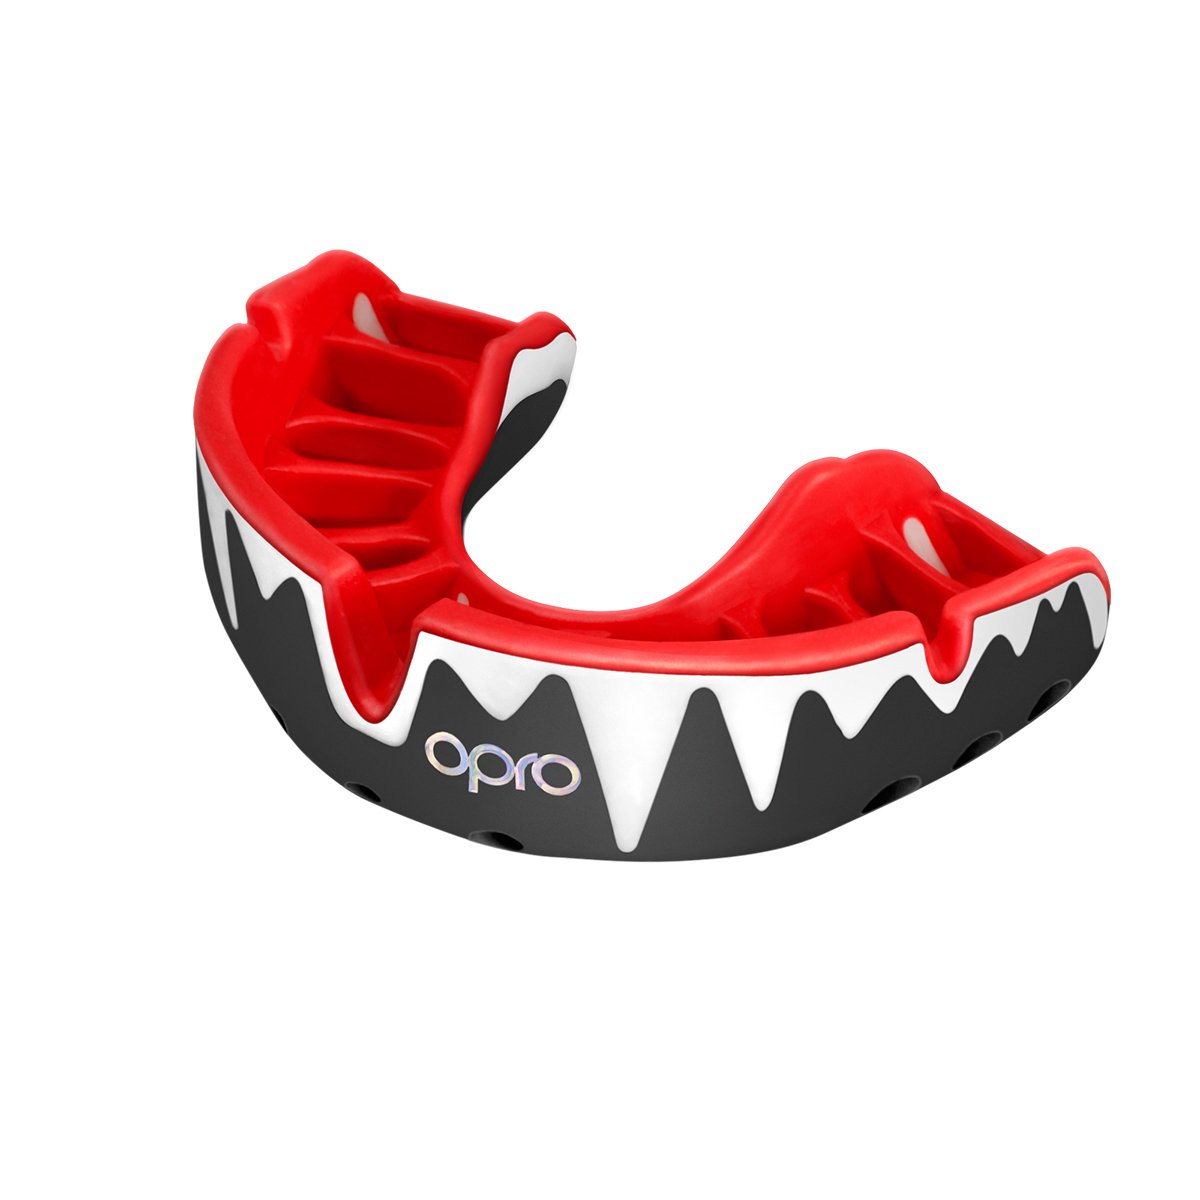 Opro Shield Rugby Protection